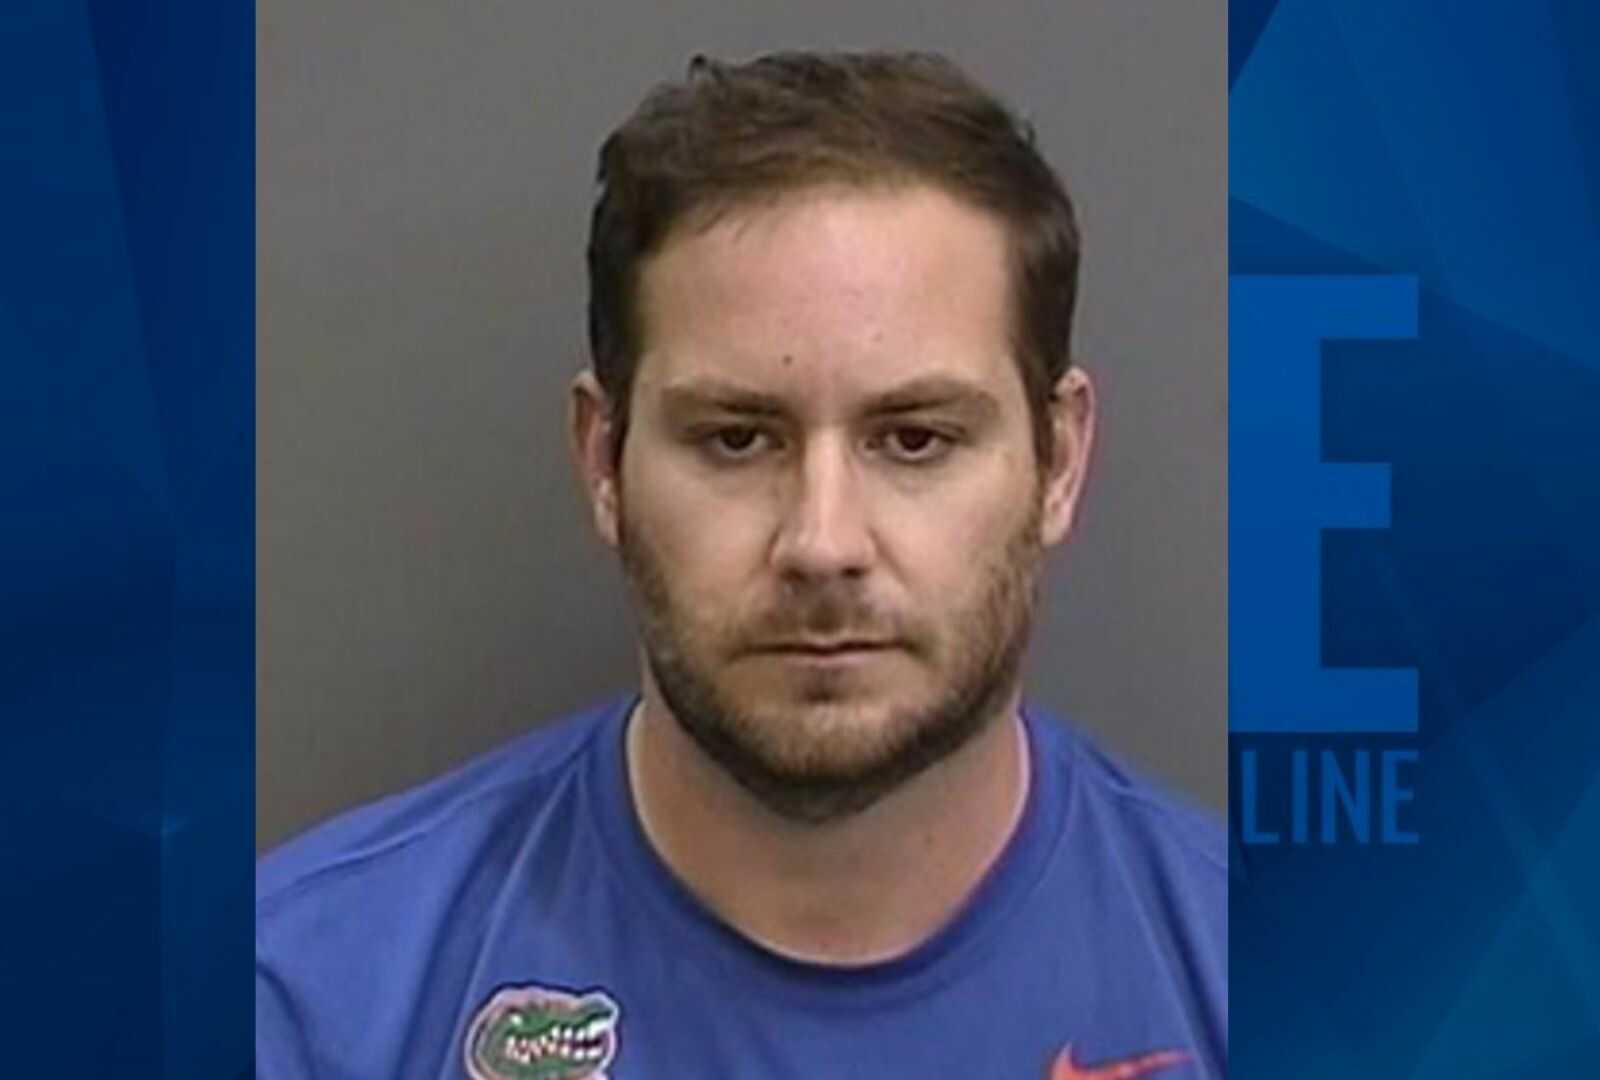 This is a photo of Matthew Hike/Hillsborough County Sheriff's Office